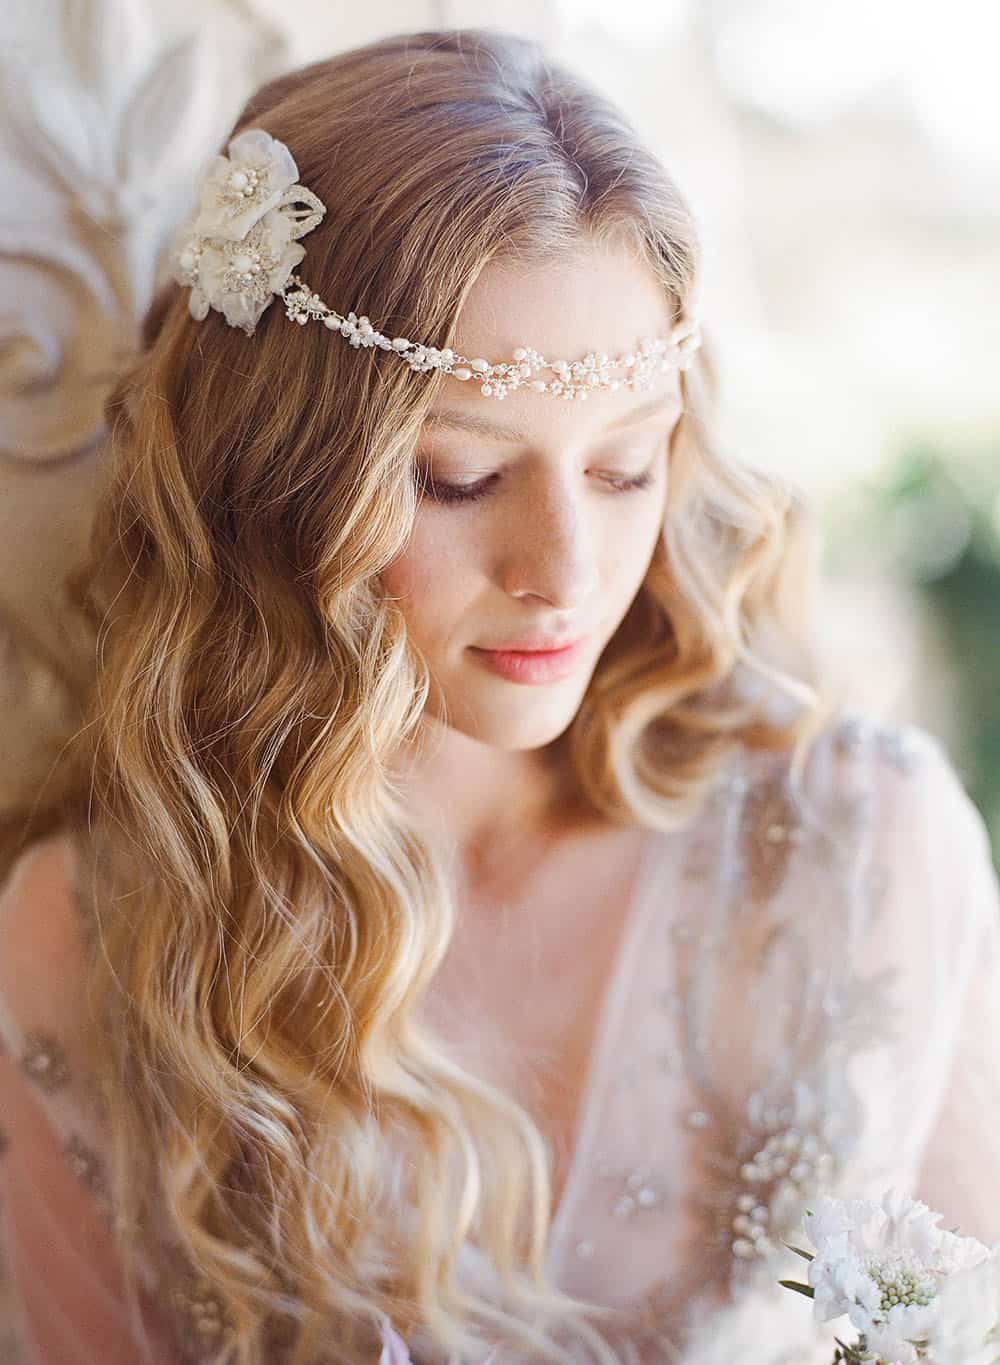 Art Nouveau Wedding Inspiration with Cattail Reeds & Violet Flowers ⋆ Ruffled